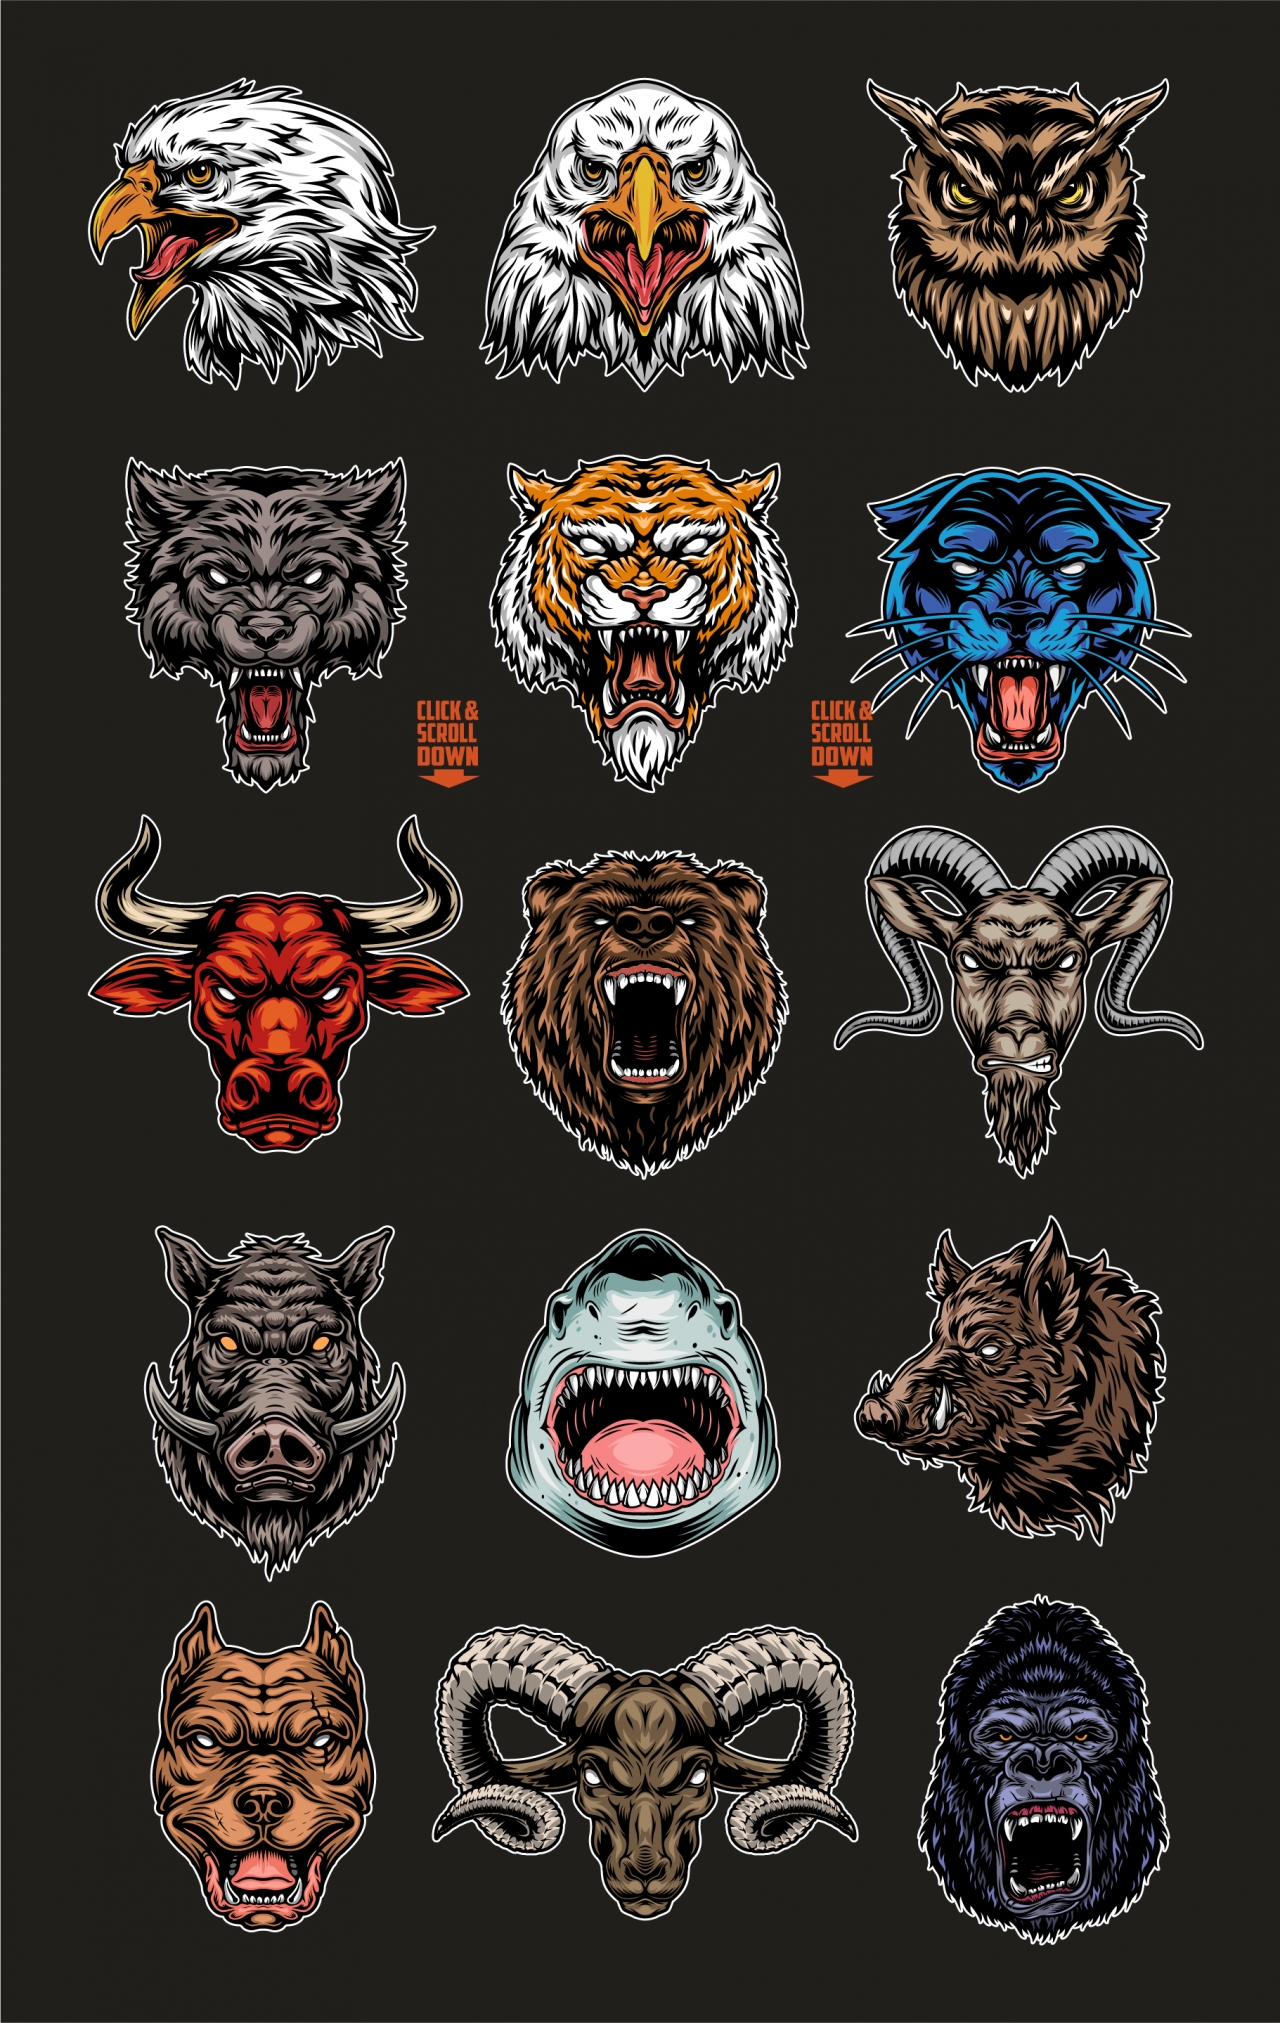 Colorful vintage angry cruel animal heads designs set with pitbull, tiger, goat, bear, gorilla, black panther, bull, wolf, eagle, owl, shark, wild boar, ram